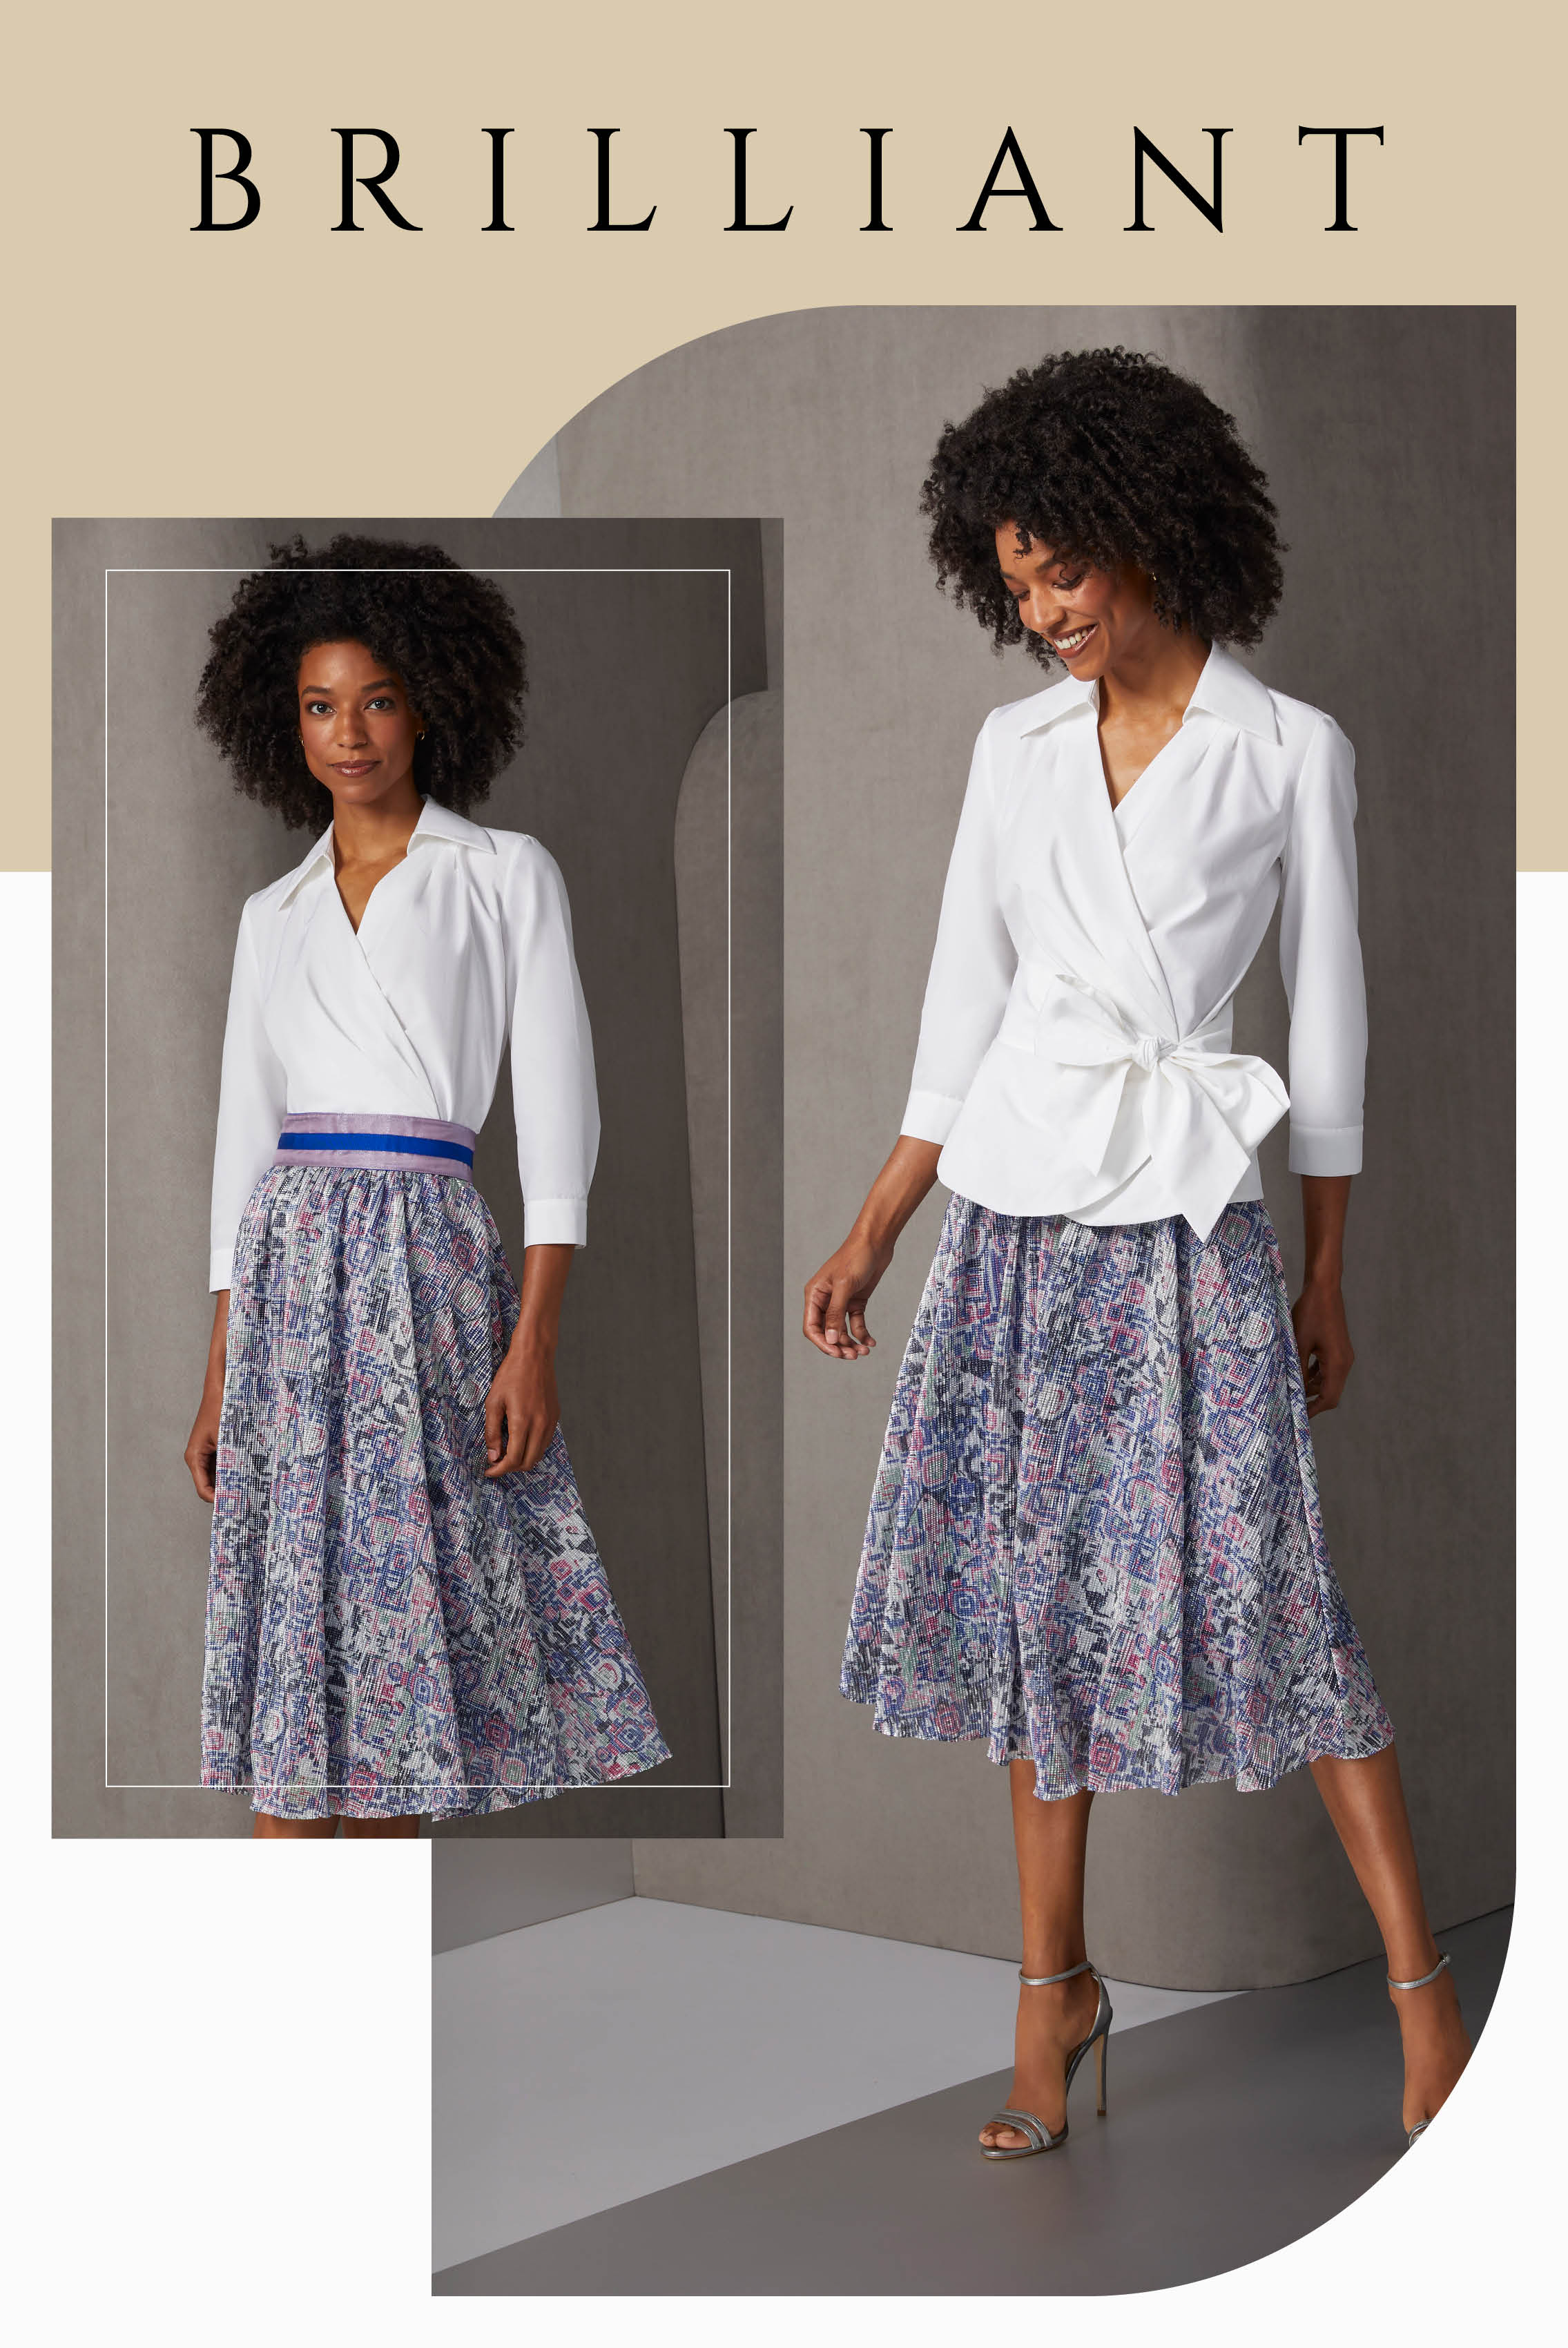 A foil-finished plissé midi skirt dazzles with its modern art print and optional ultraviolet cummerbund, crafted in organza and grosgrain ribbons. The drama of the skirt is matched by that of the white, silk-rich wrap blouse with an optional self sash. 